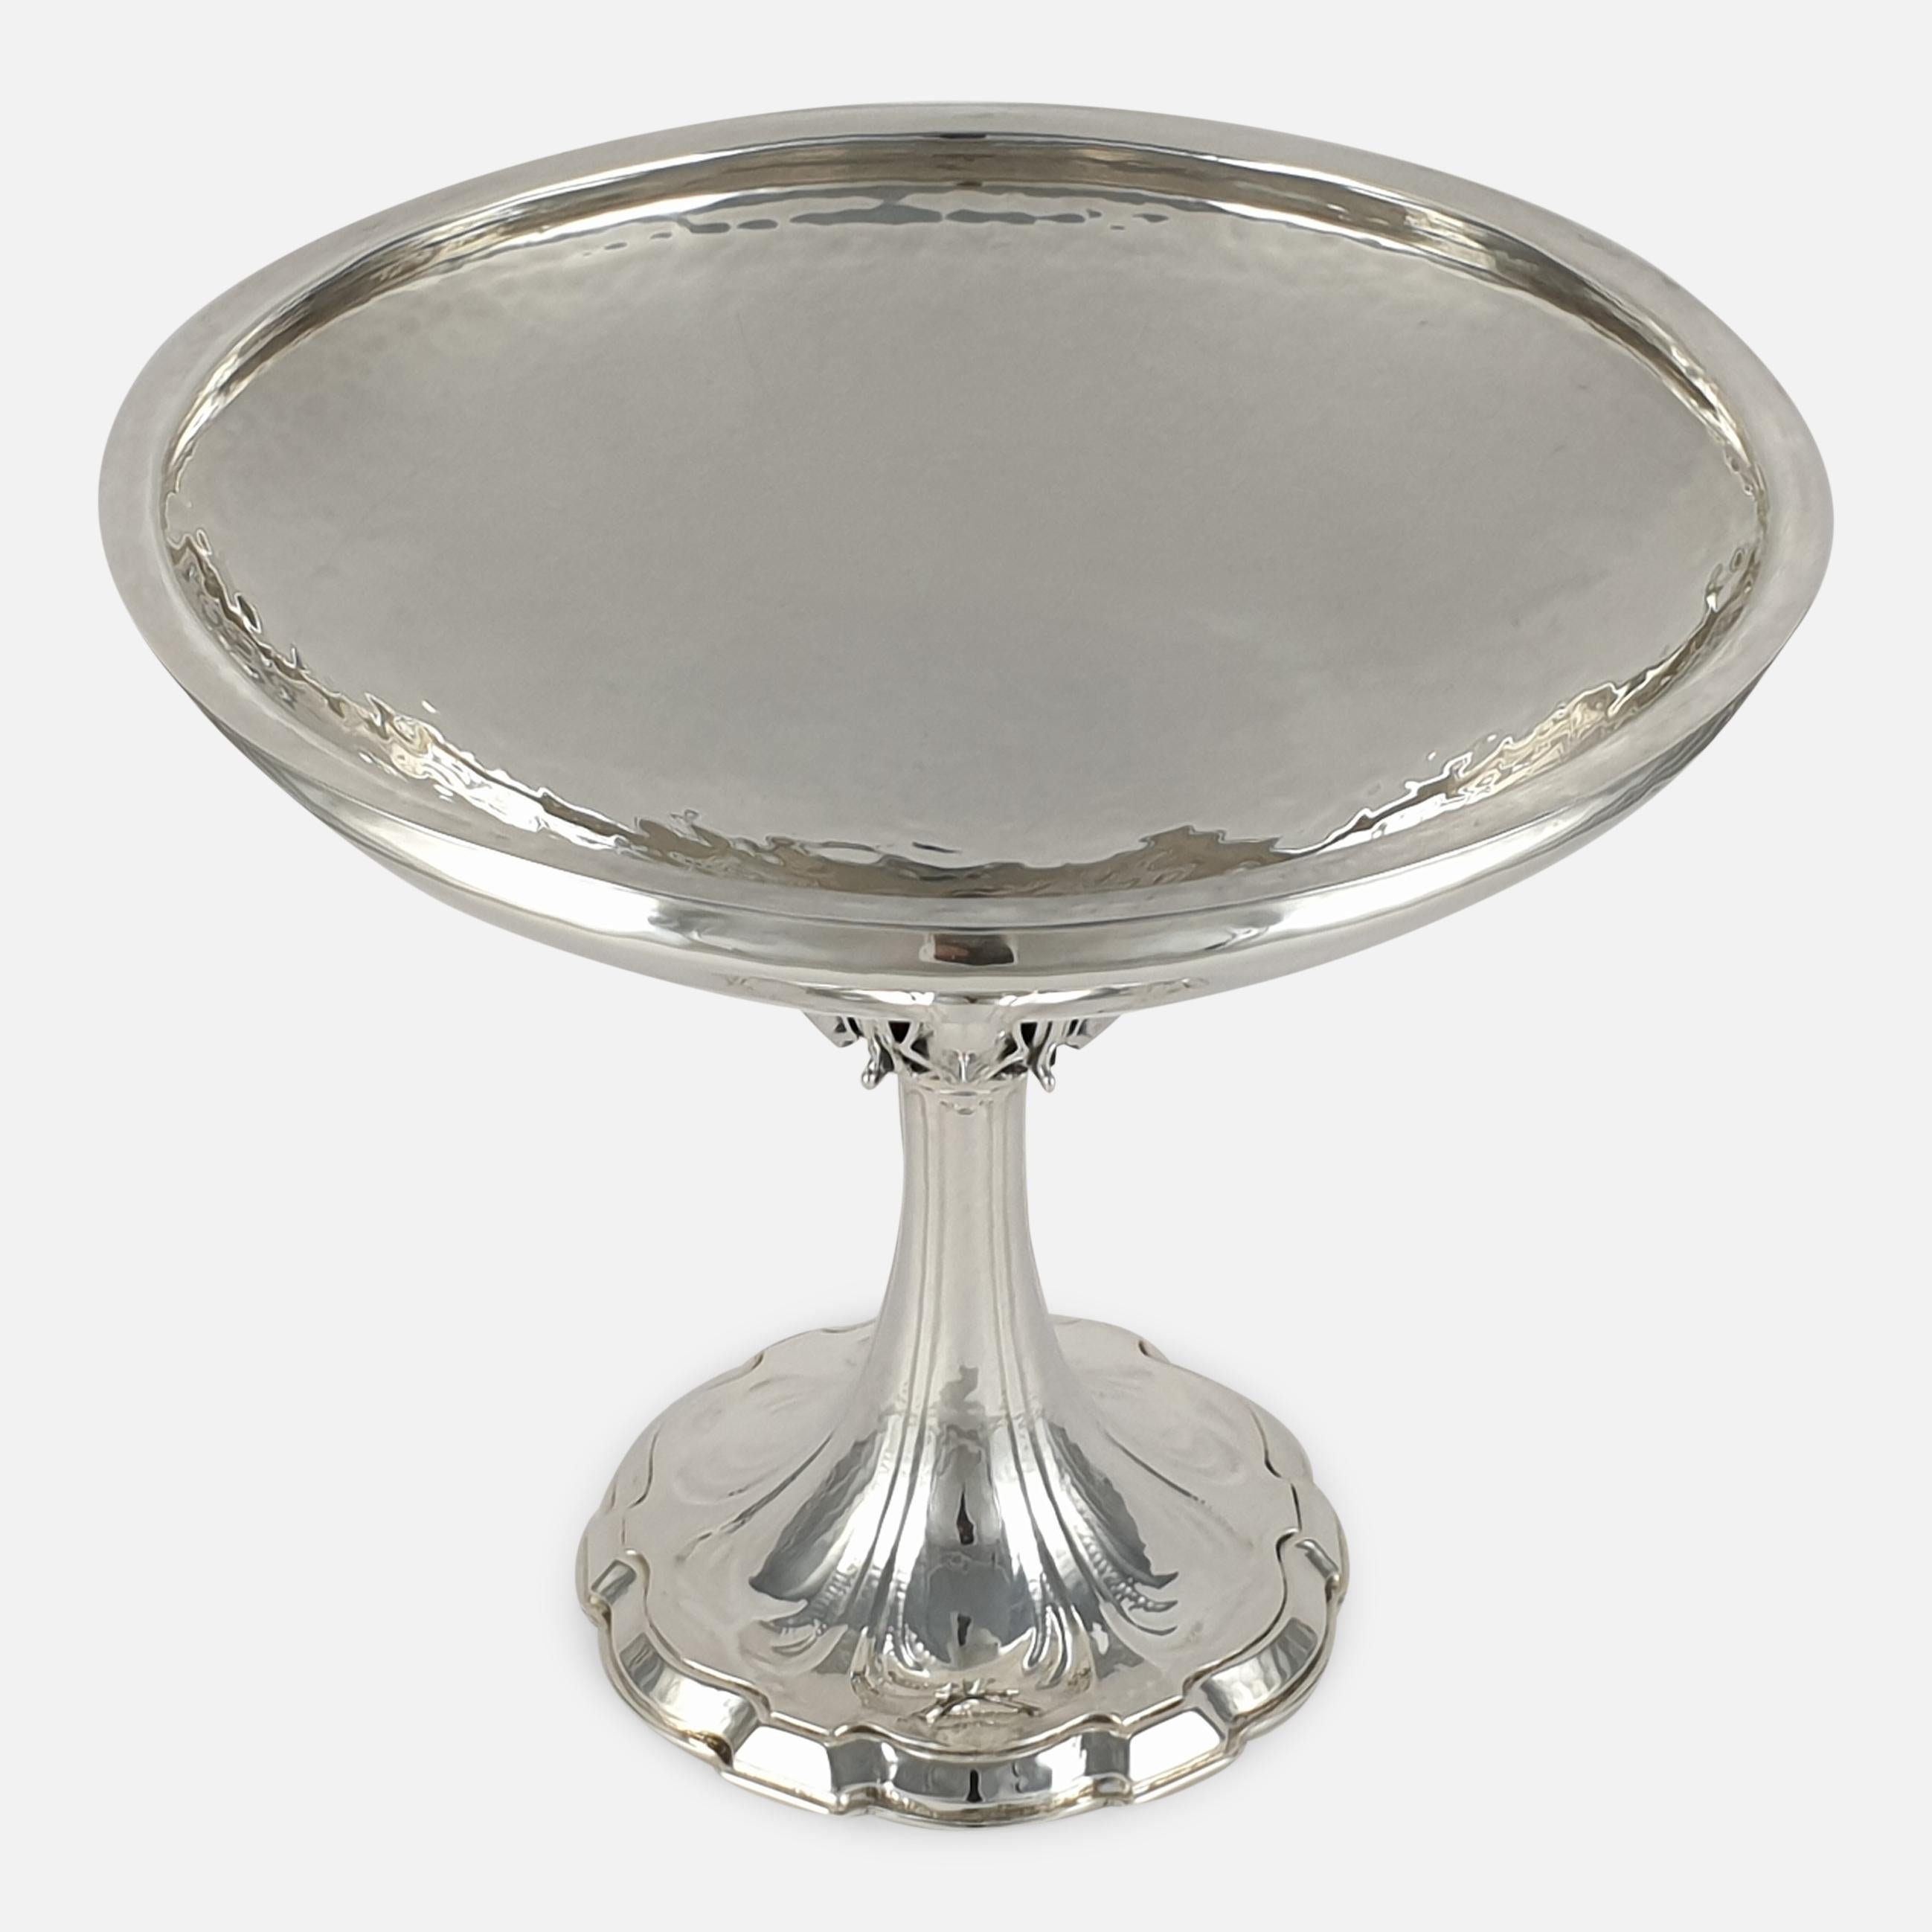 Hammered Arts & Crafts Sterling Silver Tazza, Omar Ramsden, London, 1926 For Sale